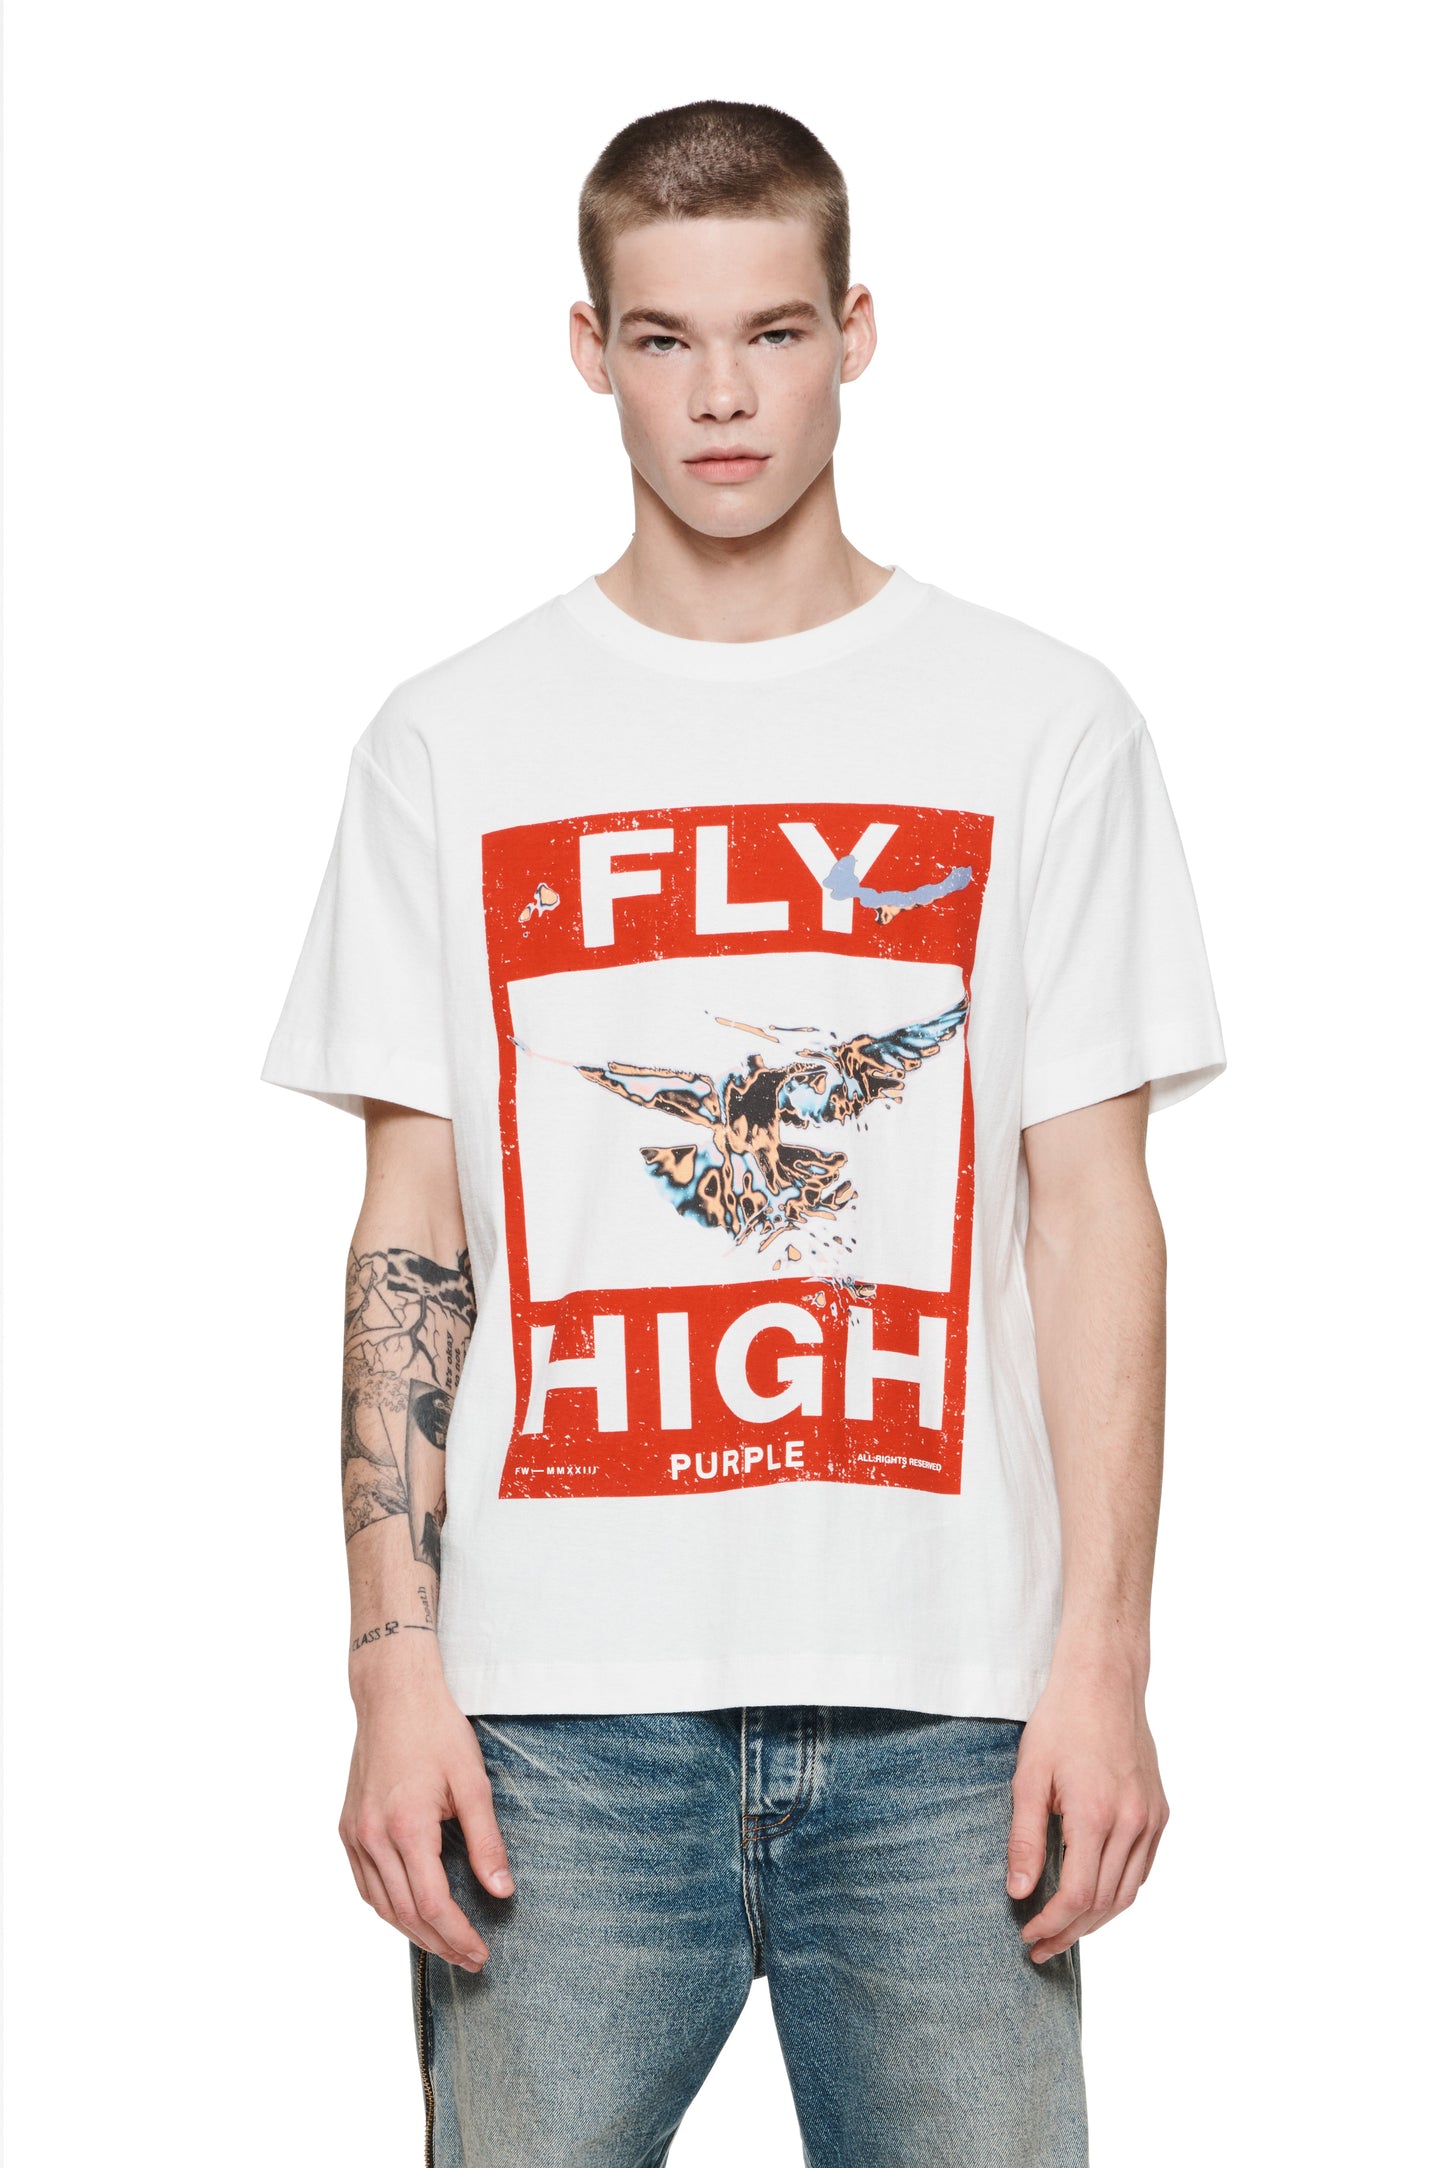 FLY HIGH T-SHIRT - Off White